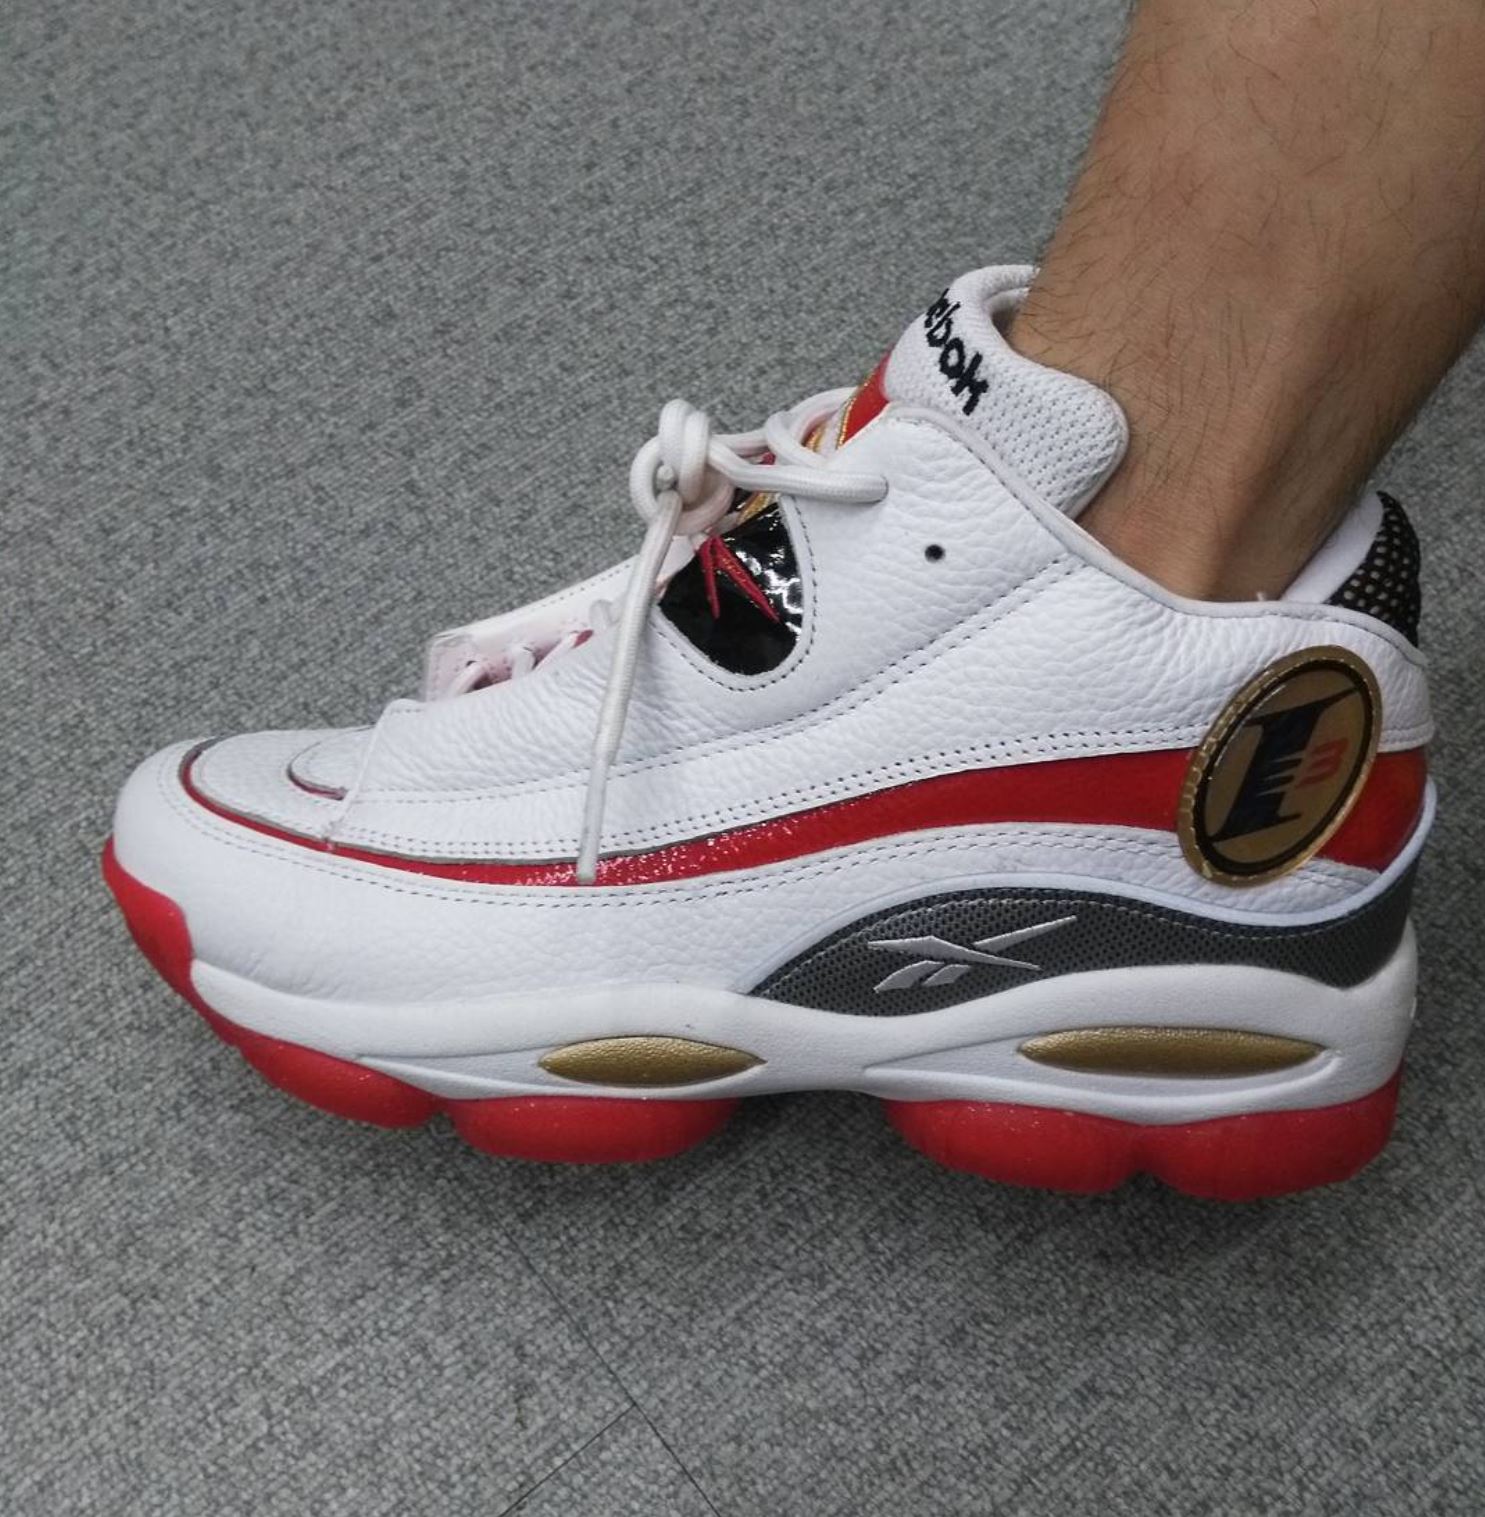 reebok answer 1 white red on foot 1